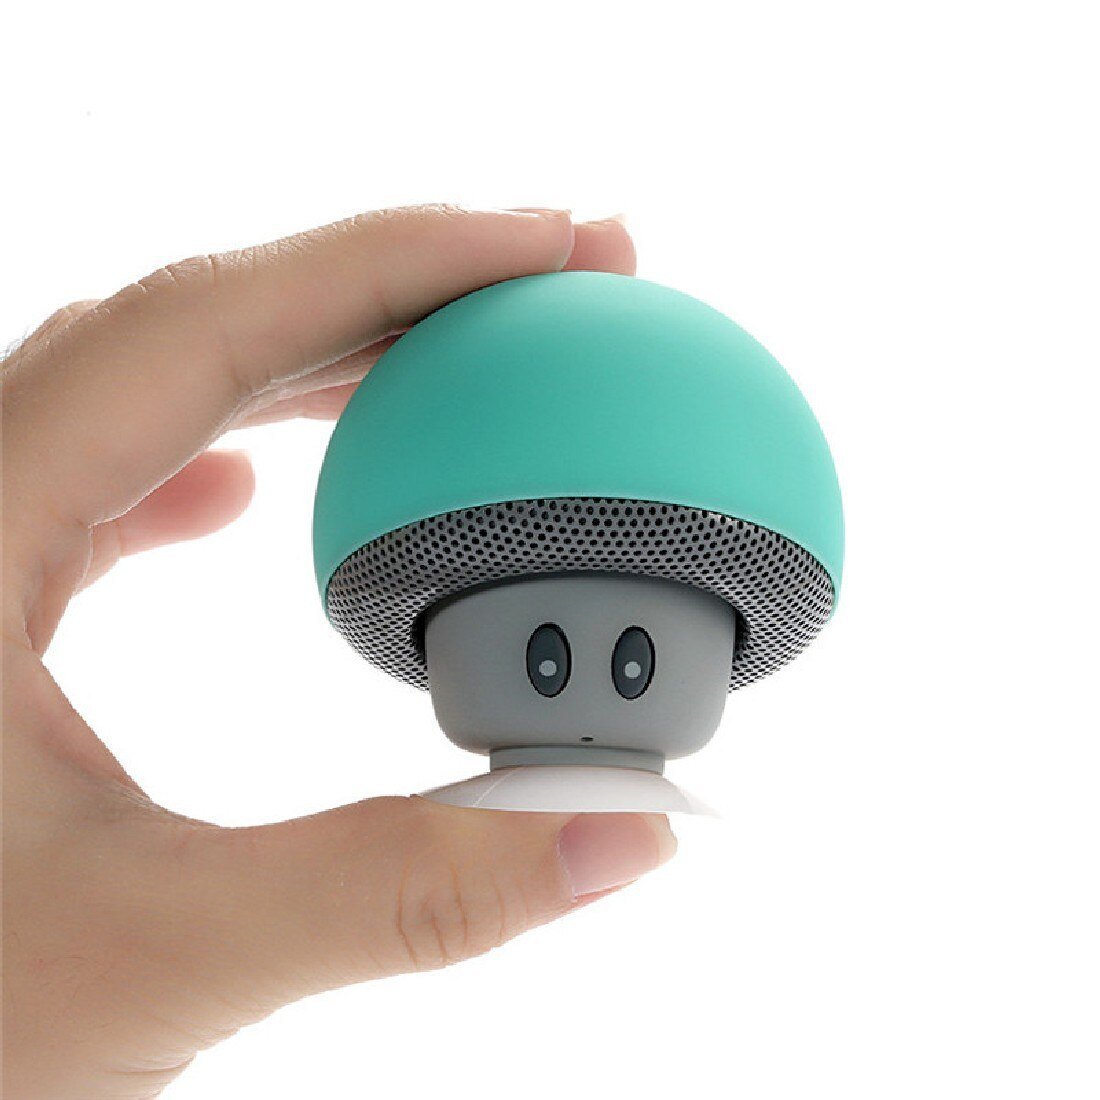 Noyokere Wireless Bluetooth Mini Speaker Mushroom Waterof Silicone Suction Handsfree Holder Music Player For Iphone Android Pink